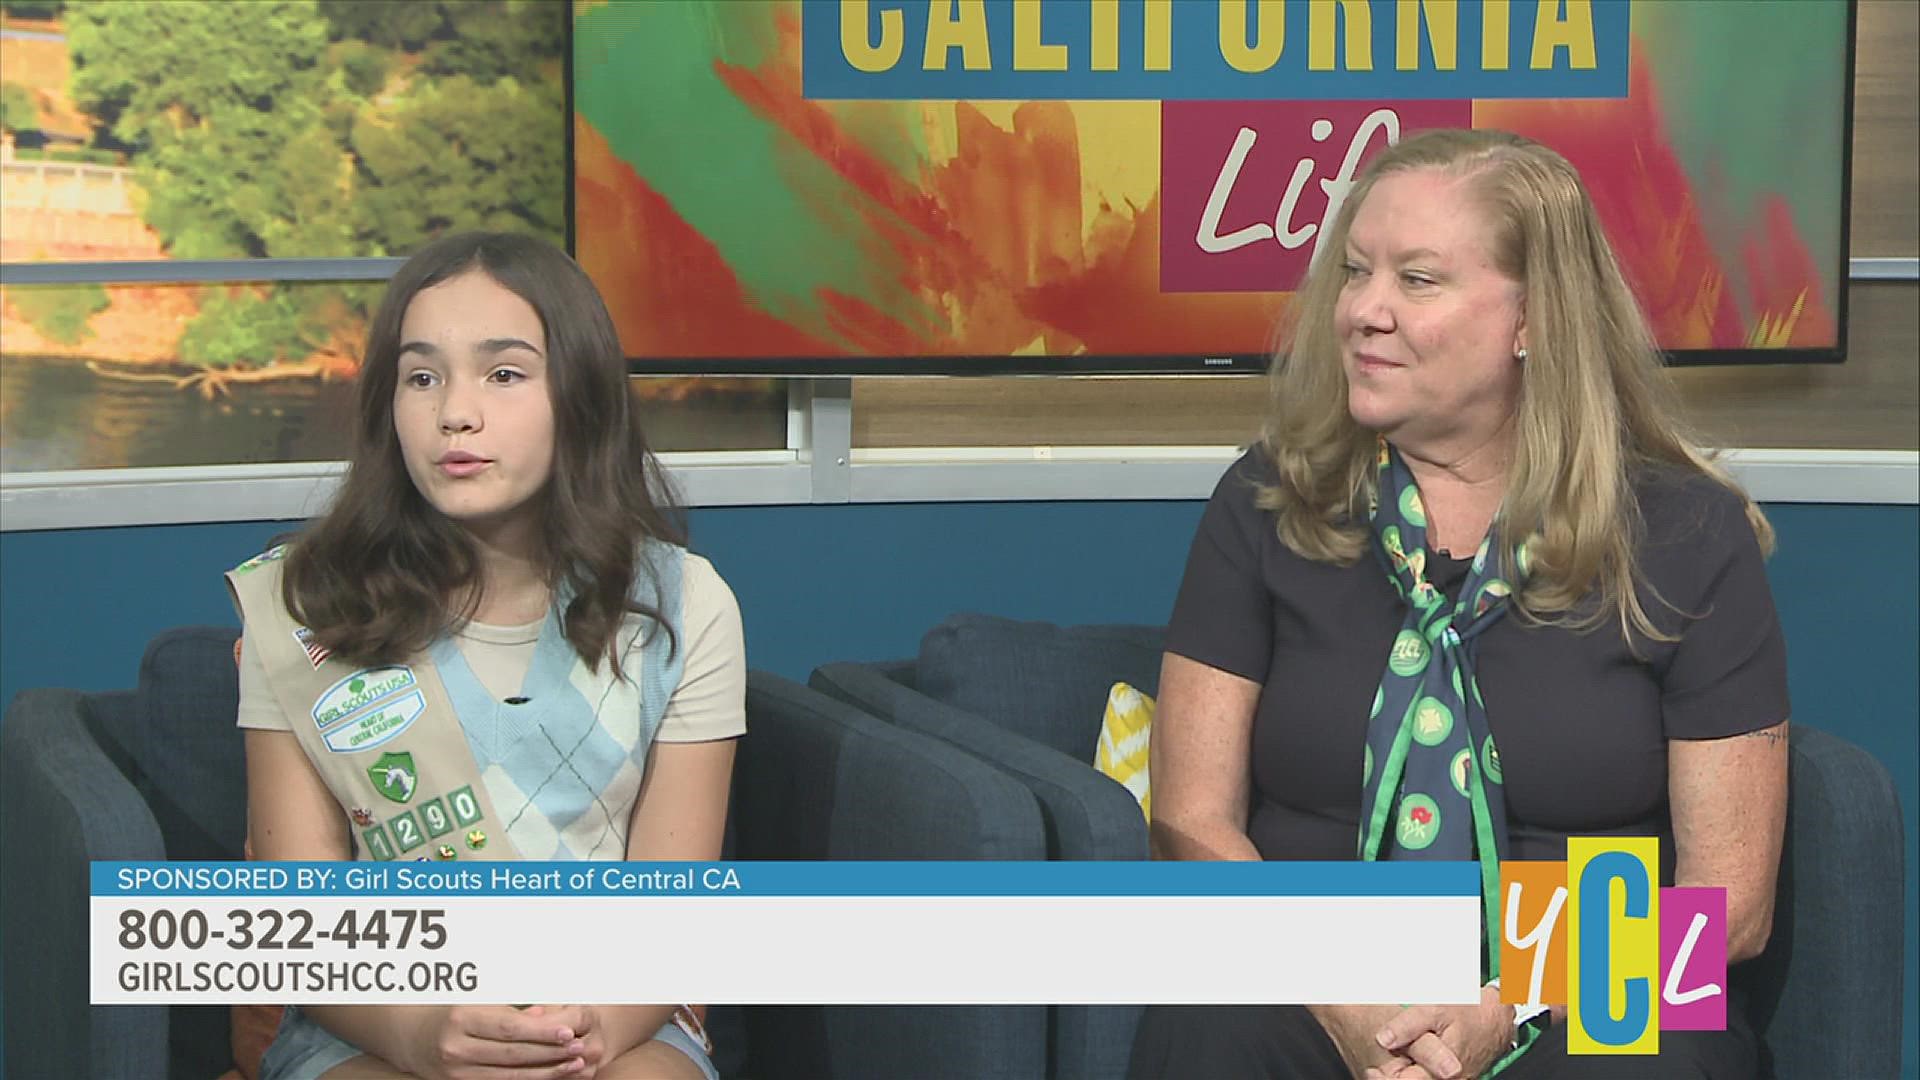 We've always seen the Girl Scouts out selling cookies and earning badges, but what does it mean to be one? This segment is paid by Girl Scouts Heart of Central CA.